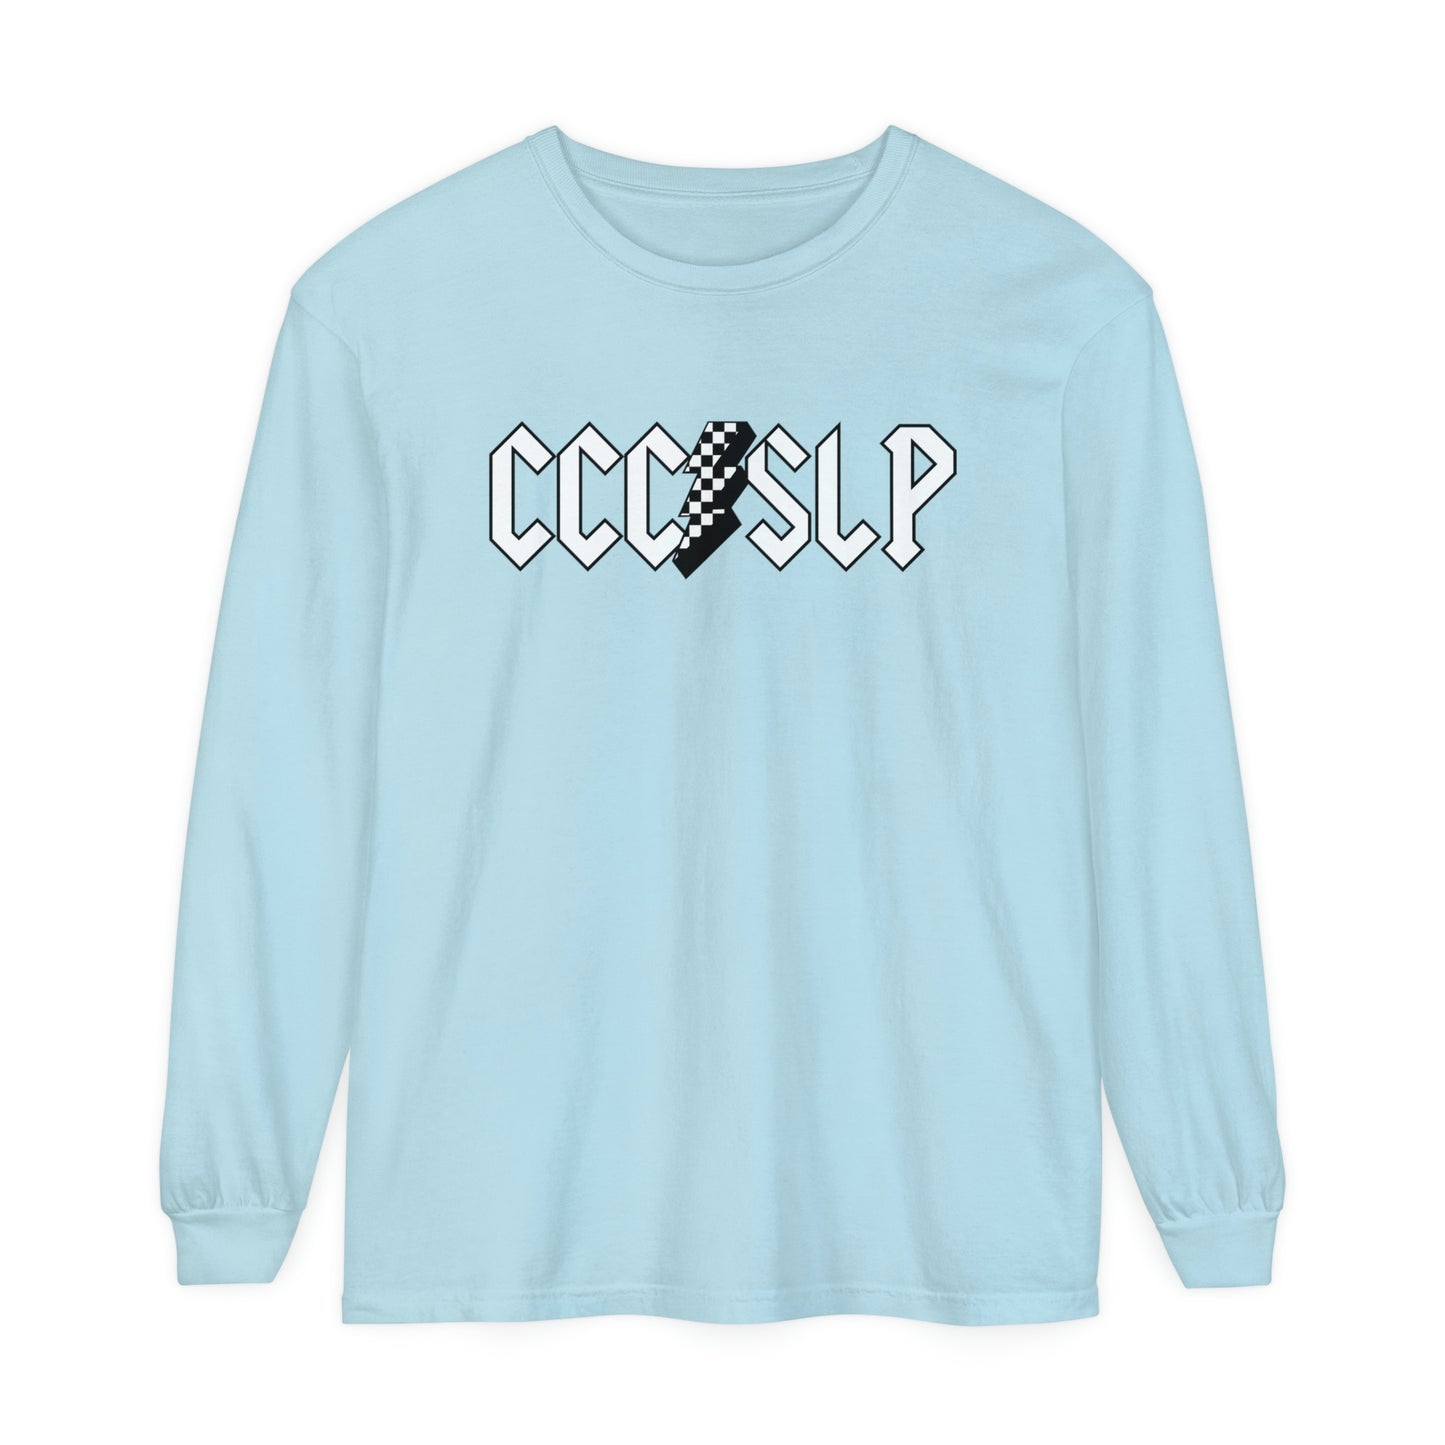 CCC SLP Band Inspired Comfort Colors T-Shirt